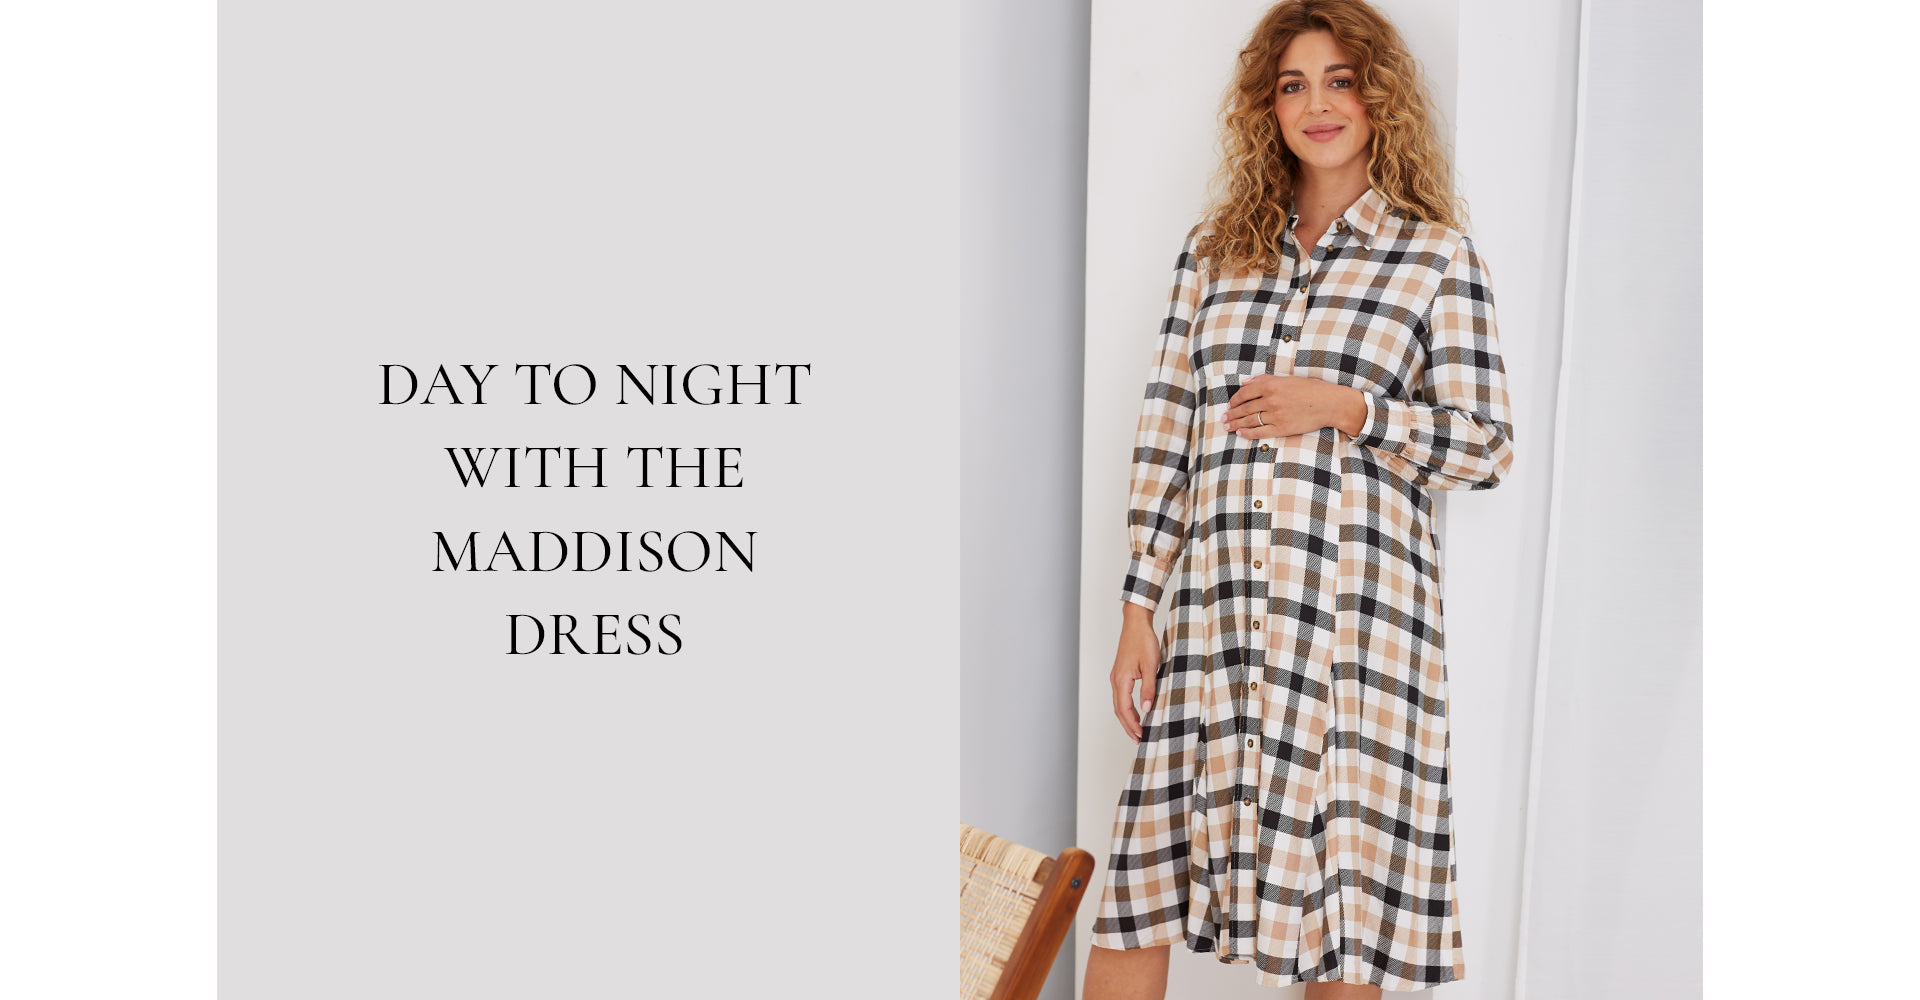 Day to night with the Maddison Dress